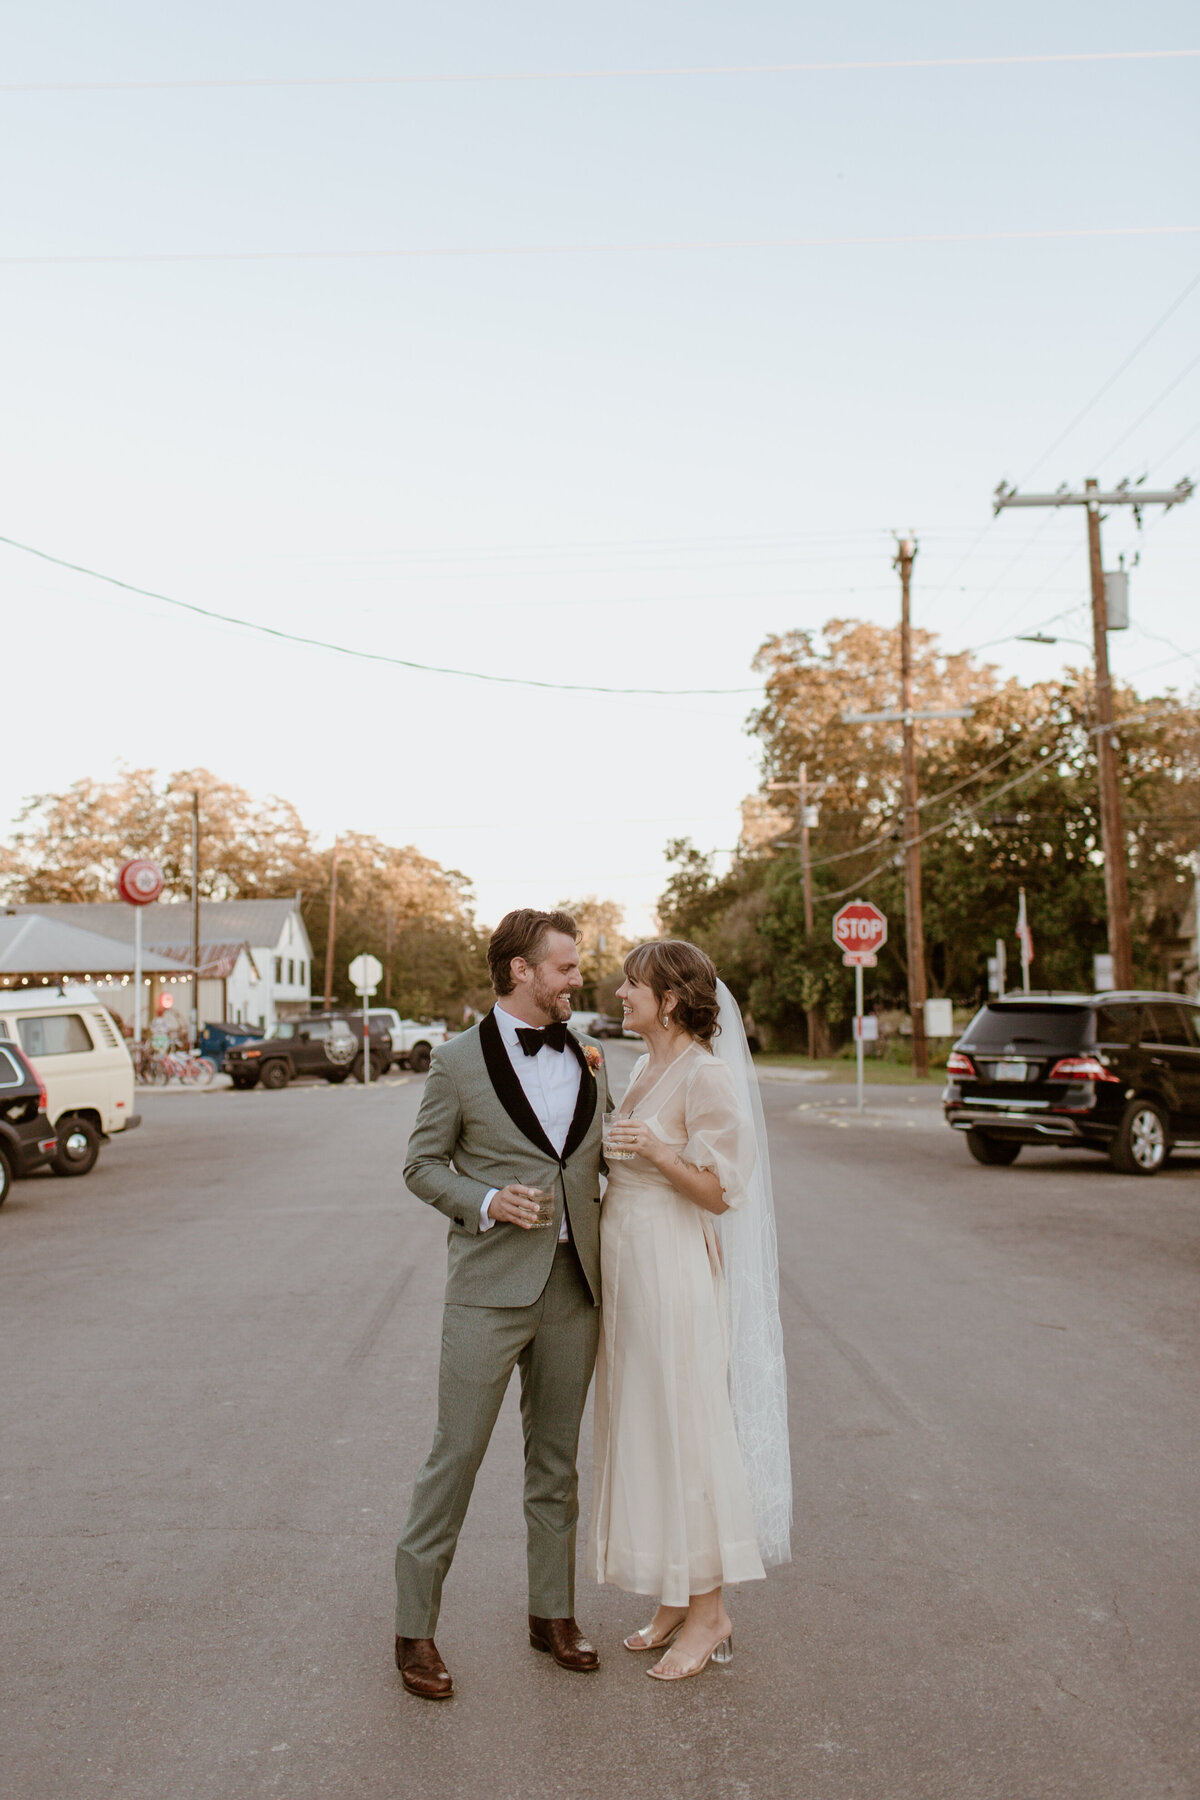 A happy just-married couple hit the streets of Comfort Texas at sunset. Captured by Fort Worth Wedding Photographer, Megan Christine Studio